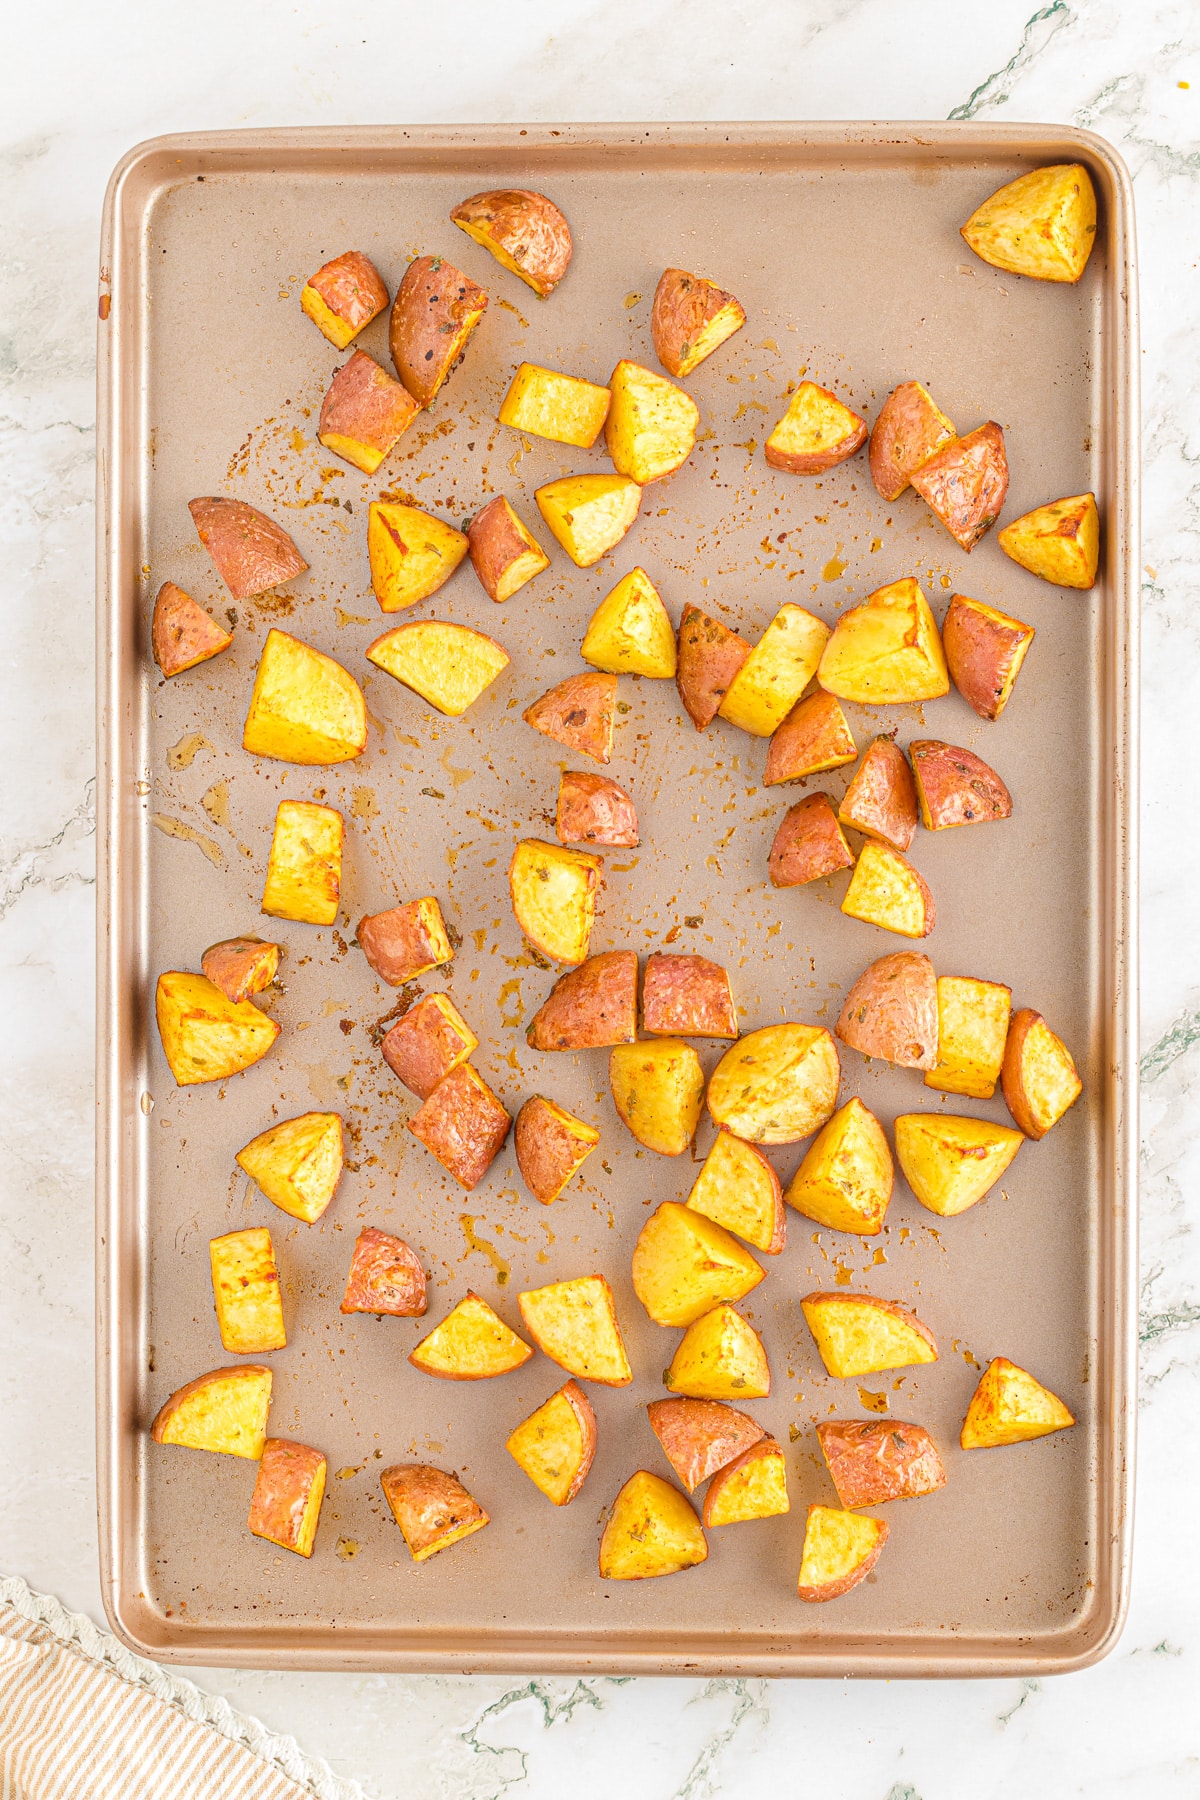 Partially roasted potatoes spread out on a sheet pan.